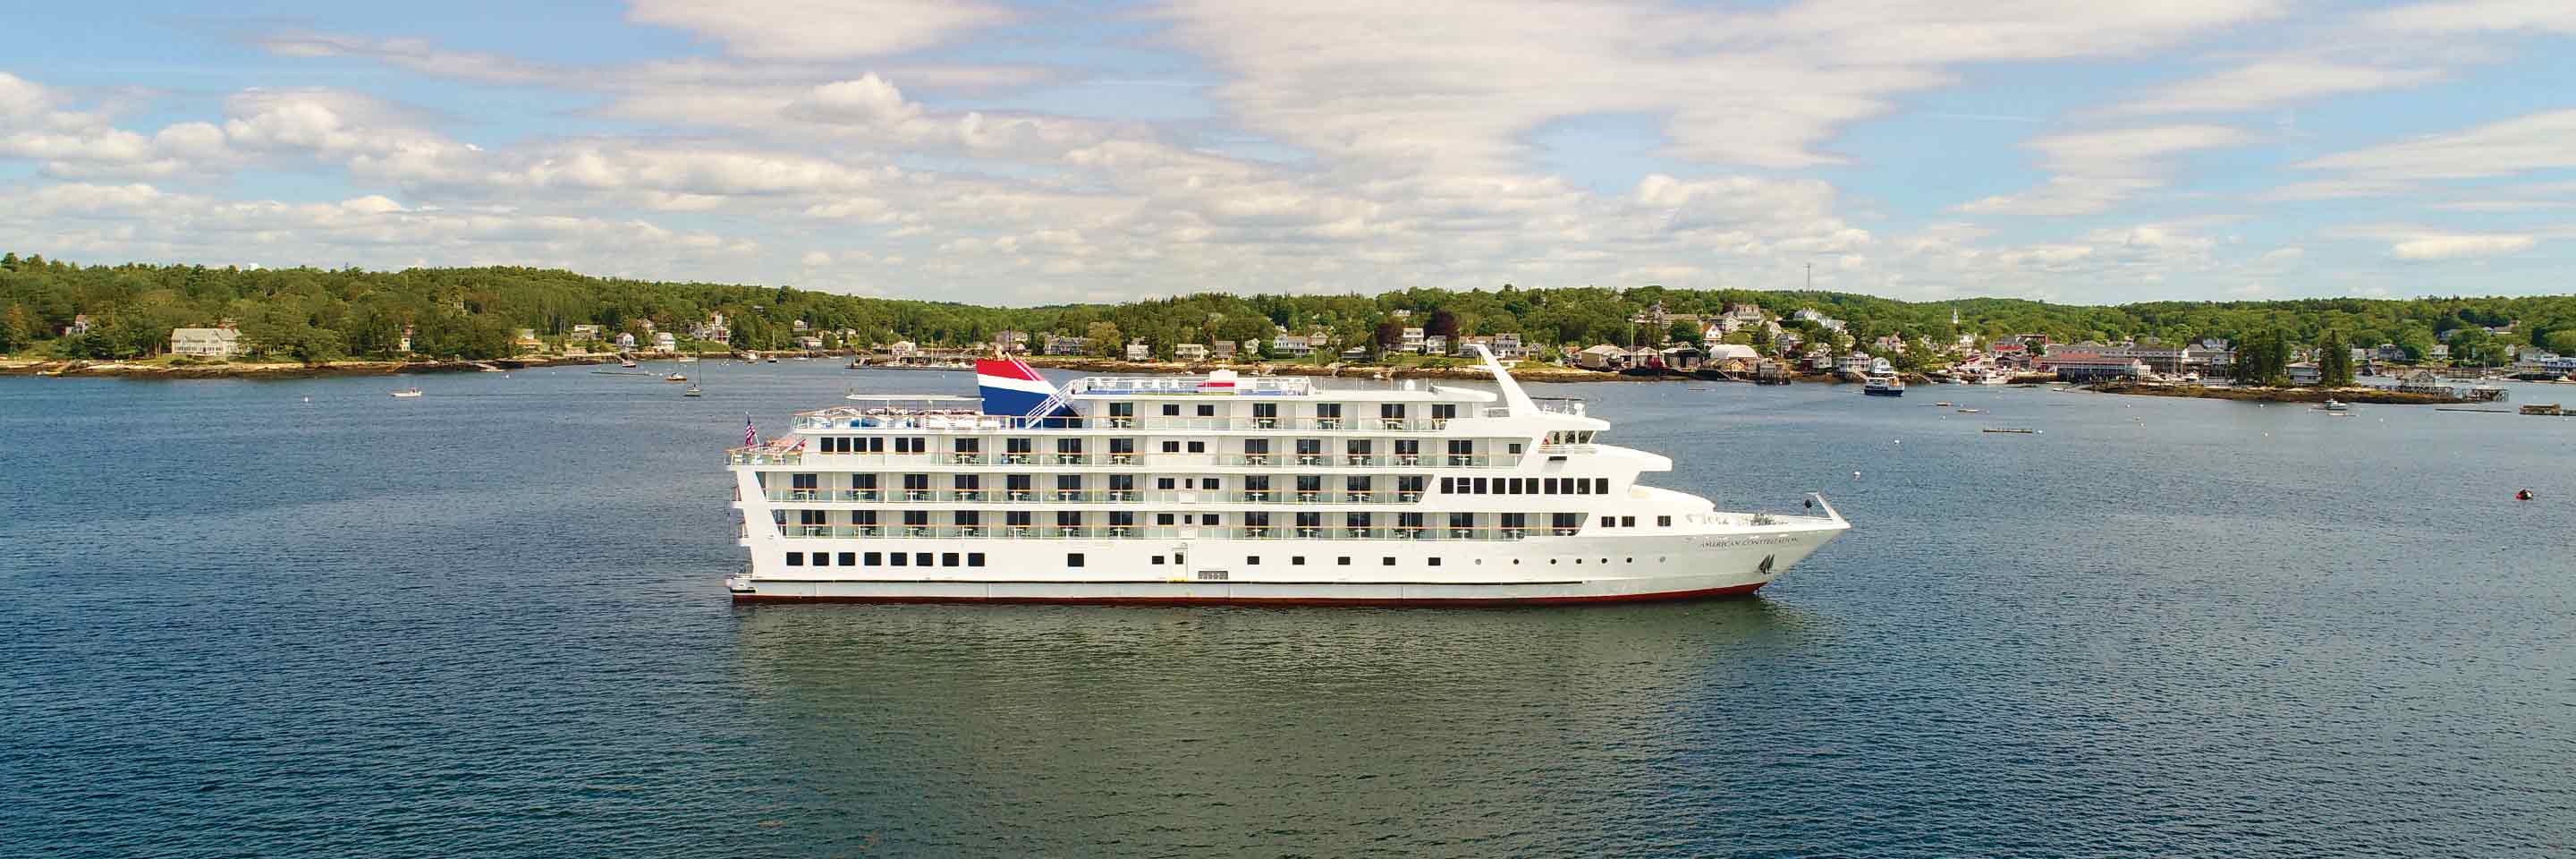 Small Cruise Ships | Riverboats & Paddlewheel | American Cruise Lines